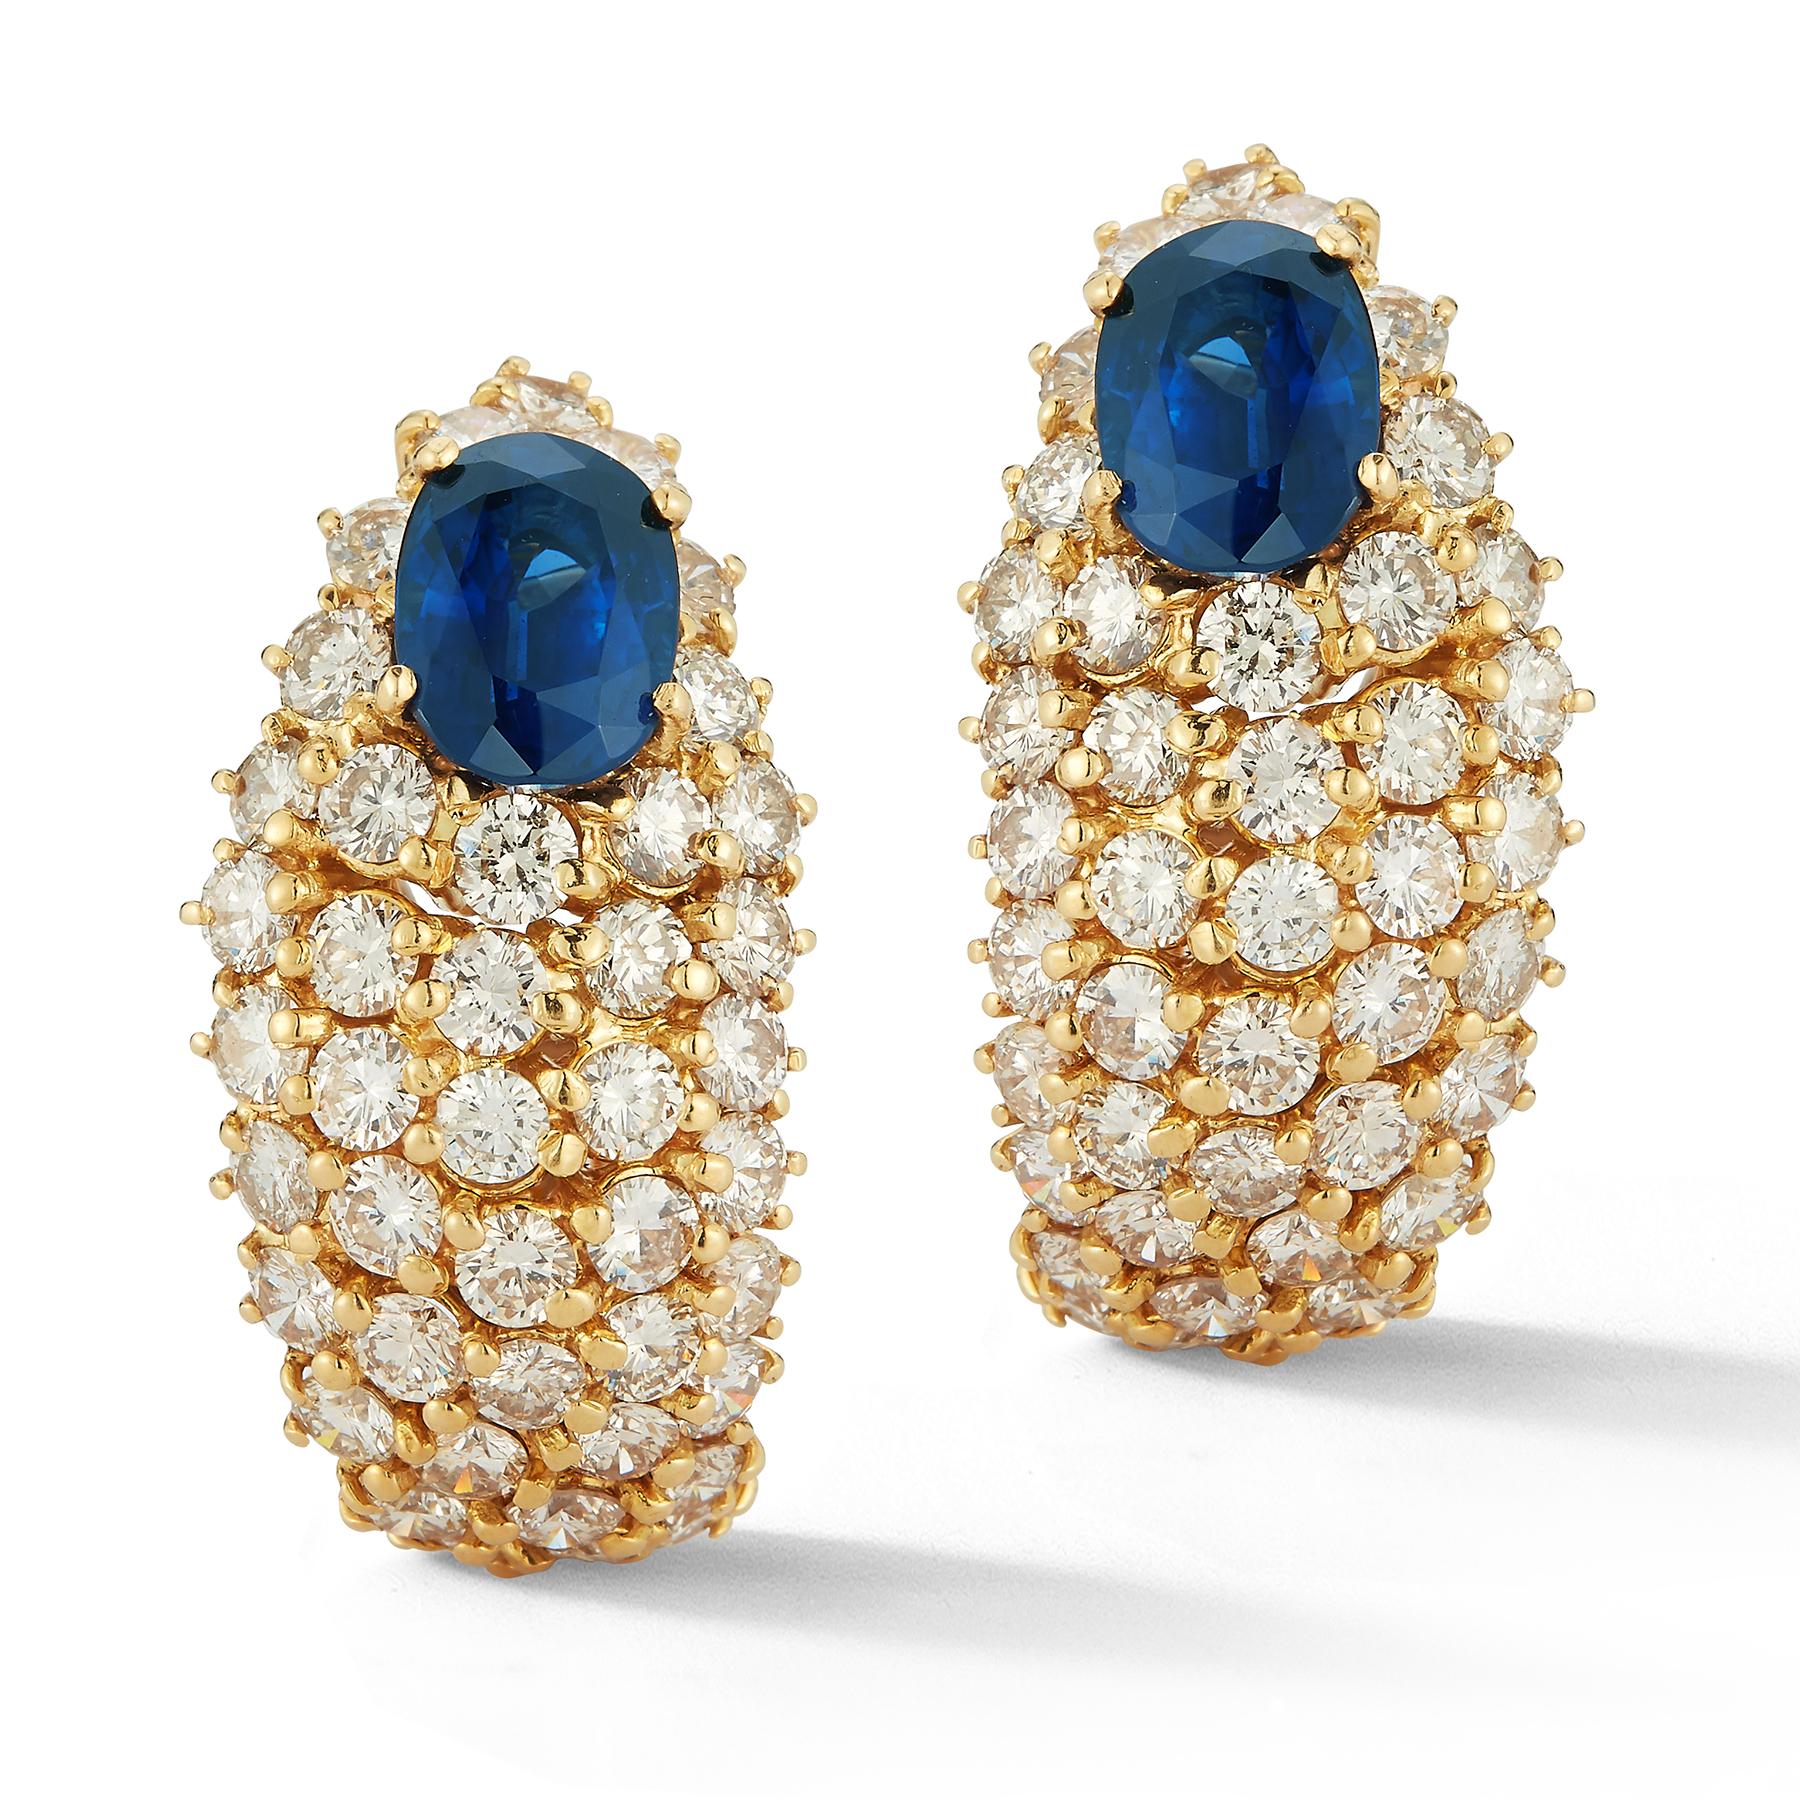 AGL Certified Oval Cut Sapphire & Diamond Gold Earrings , 2 oval sapphires surrounded by 88 round cut diamonds set in 18k yellow gold 

Diamond Weight: approximately 7.92 cts 
Sapphire Weight: approximately 6.48 cts 

Back Type: clip on with post